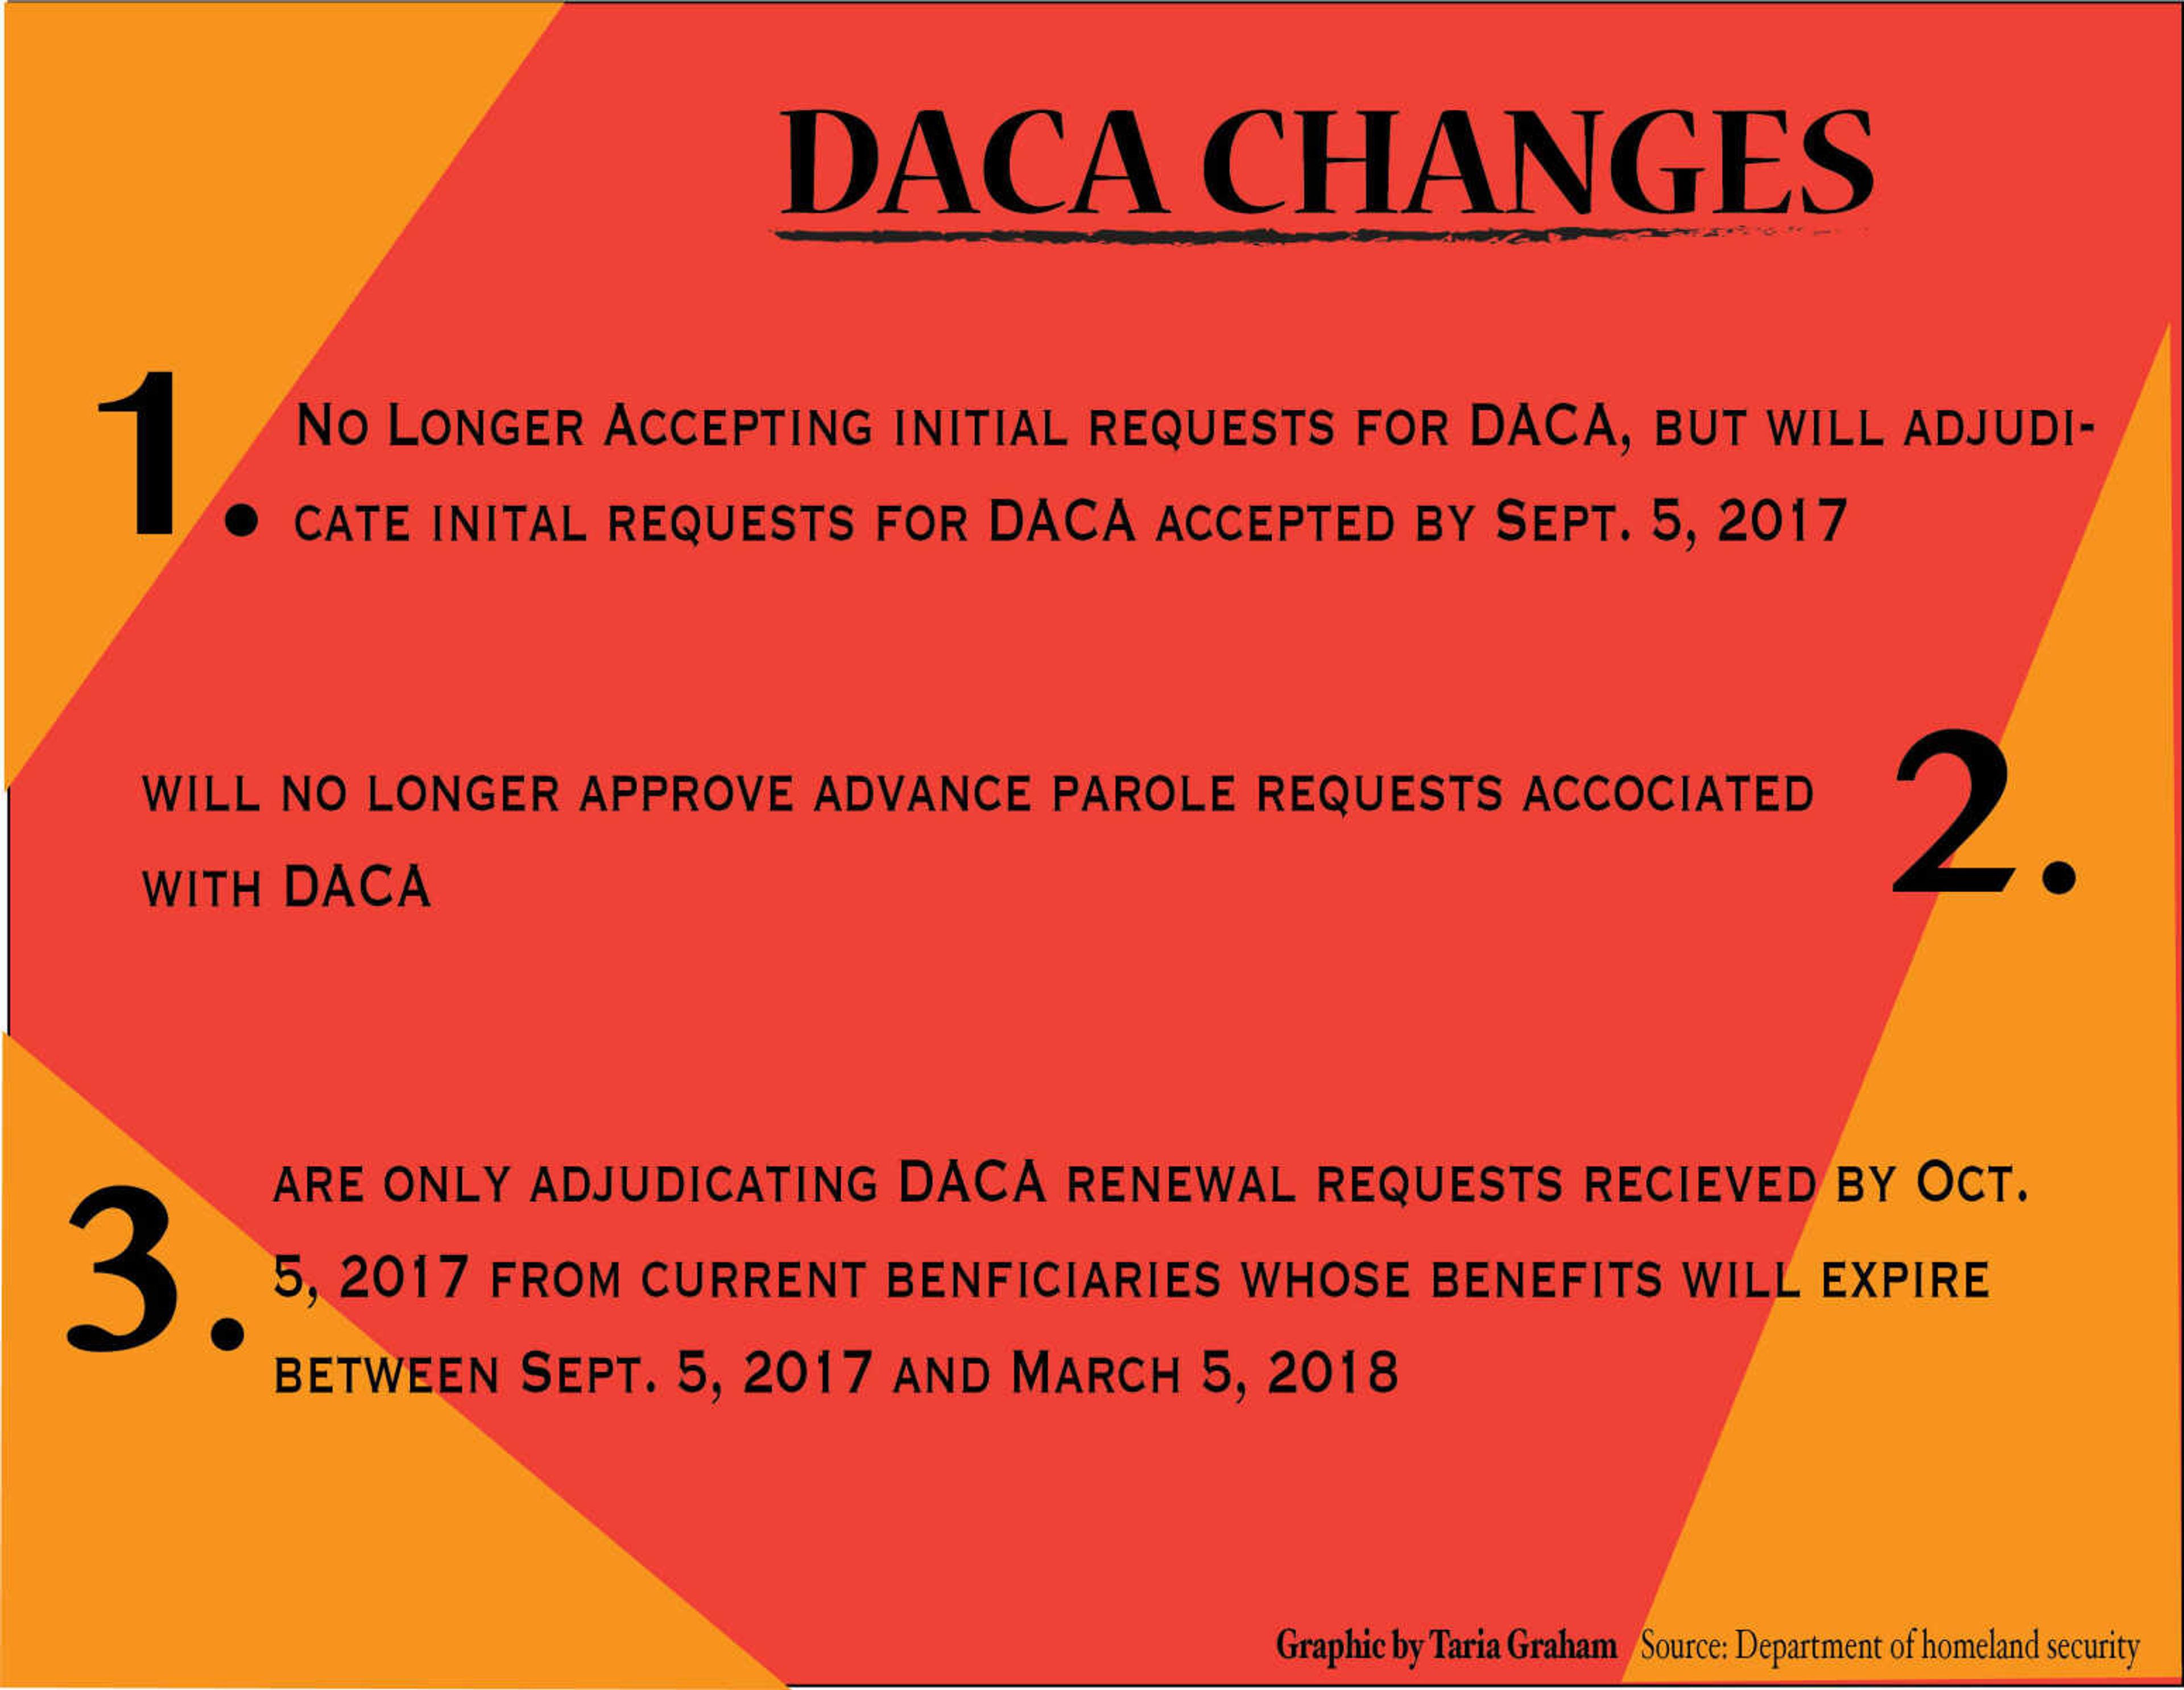 DREAMer students face uncertainty as DACA is phased out